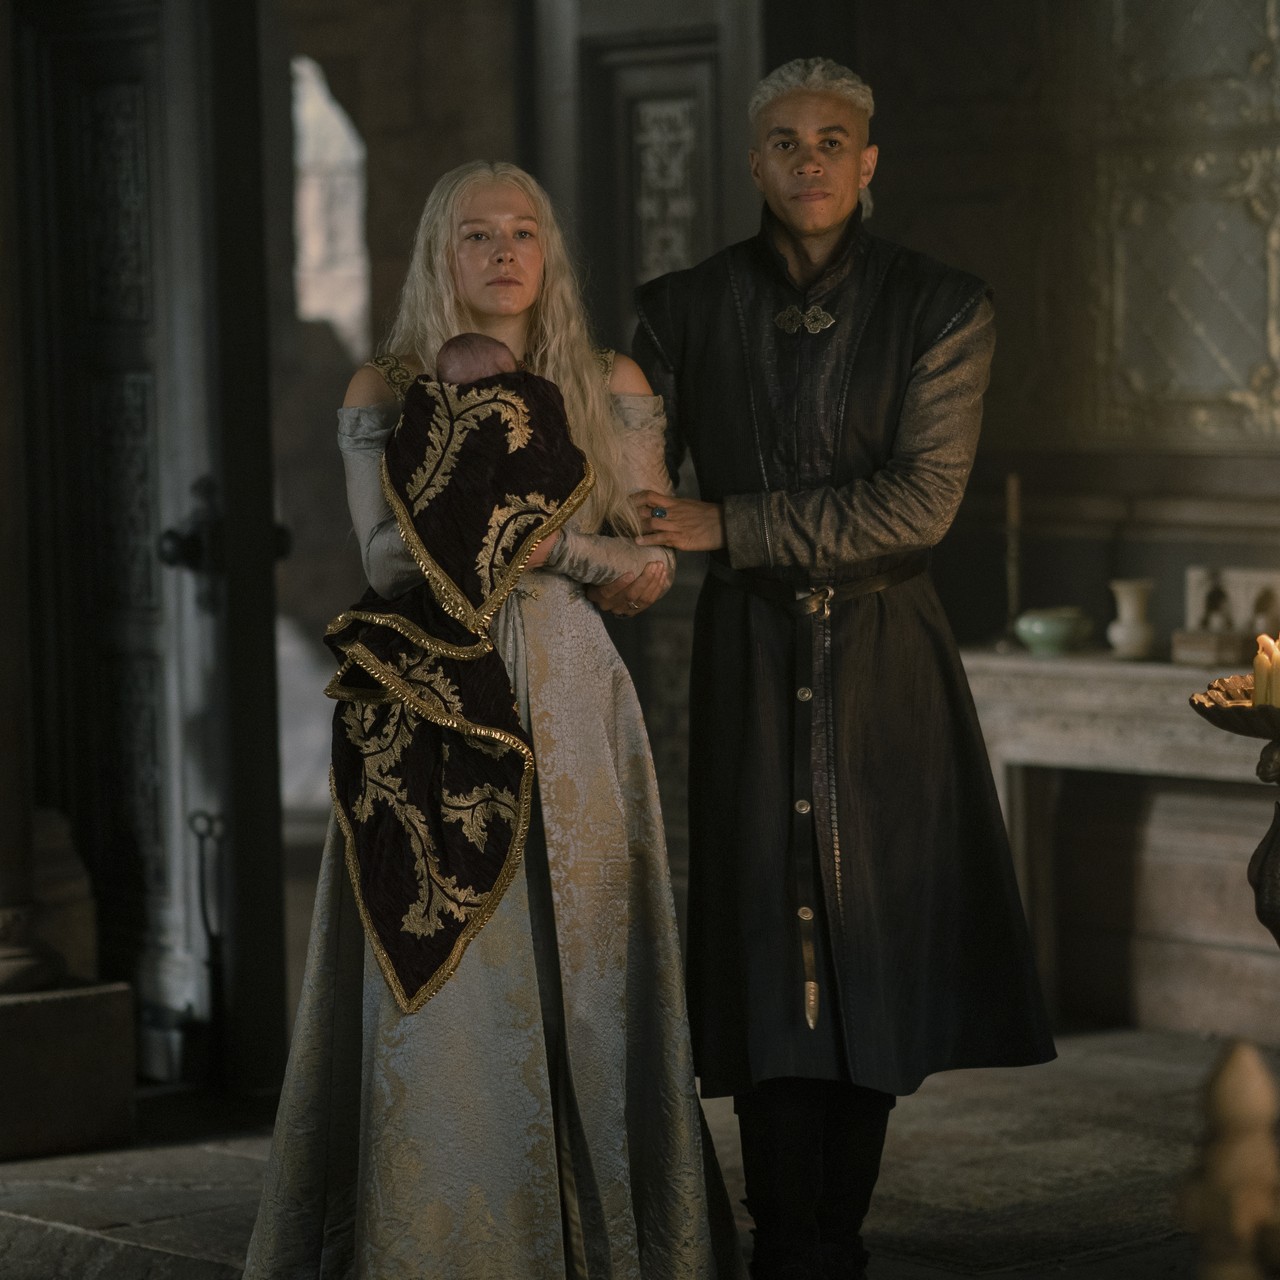 House Of The Dragon: From Rhaenyra & Daemon To Daenerys & Jon, Here's How  The HOTD Characters Are Related To Game Of Thrones Families!